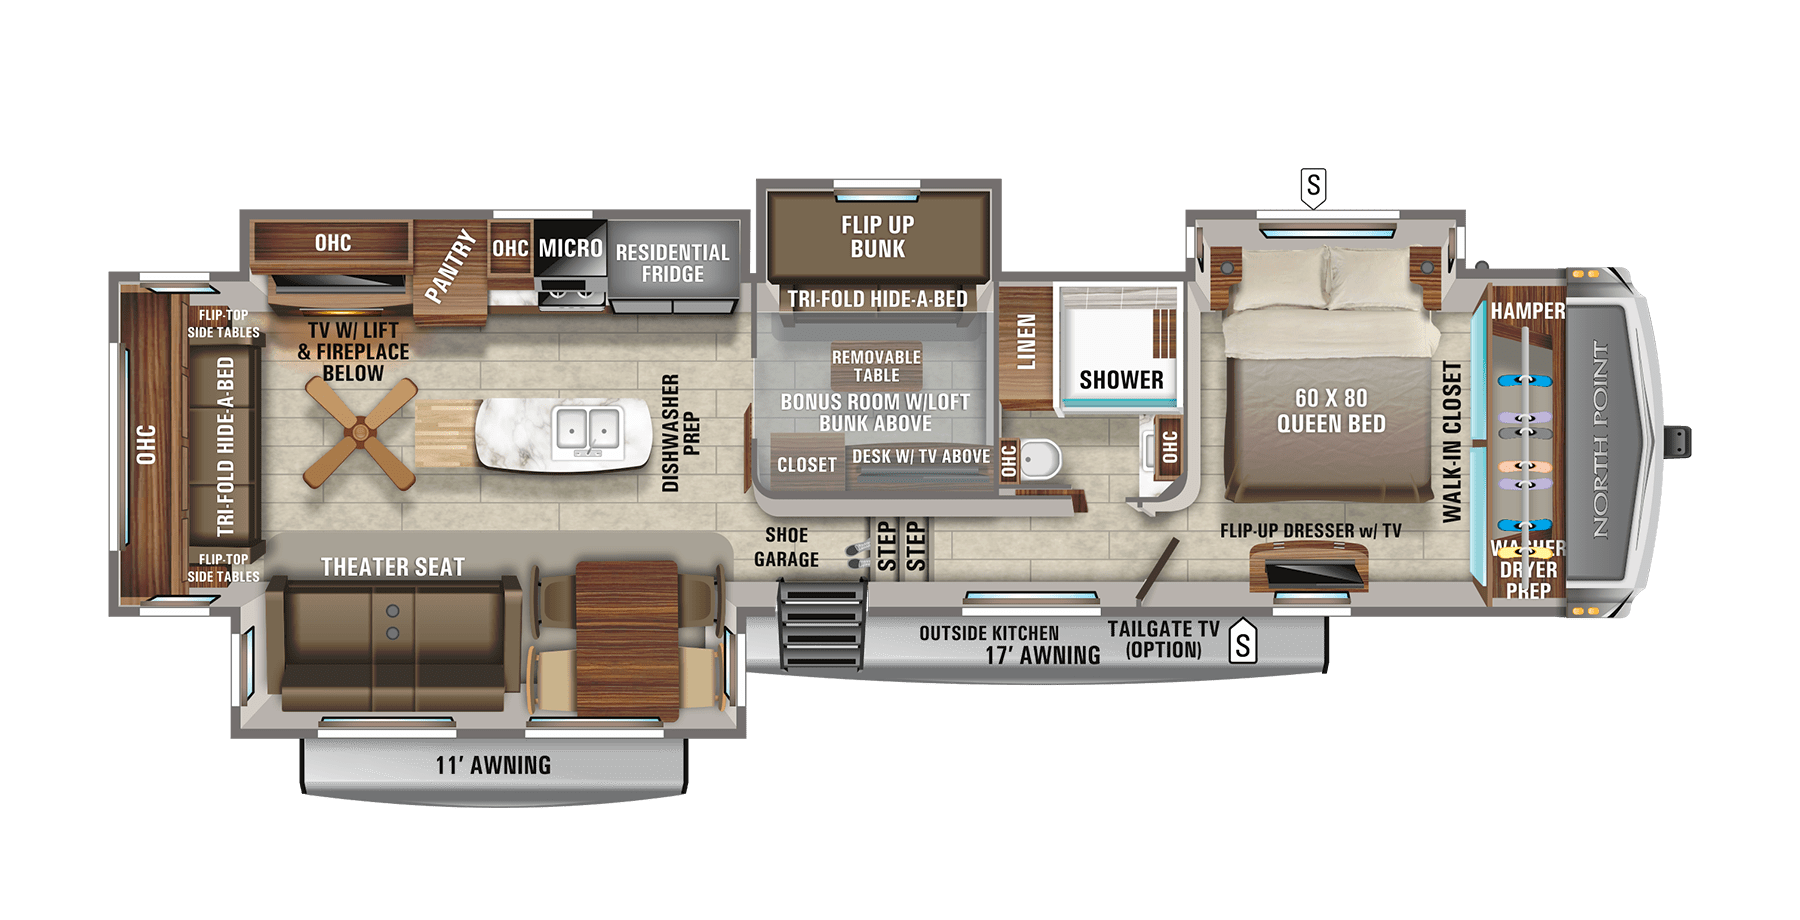 Fifth Wheel Rvs With Bunkhouses, Fifth Wheel Campers With Bunk Beds